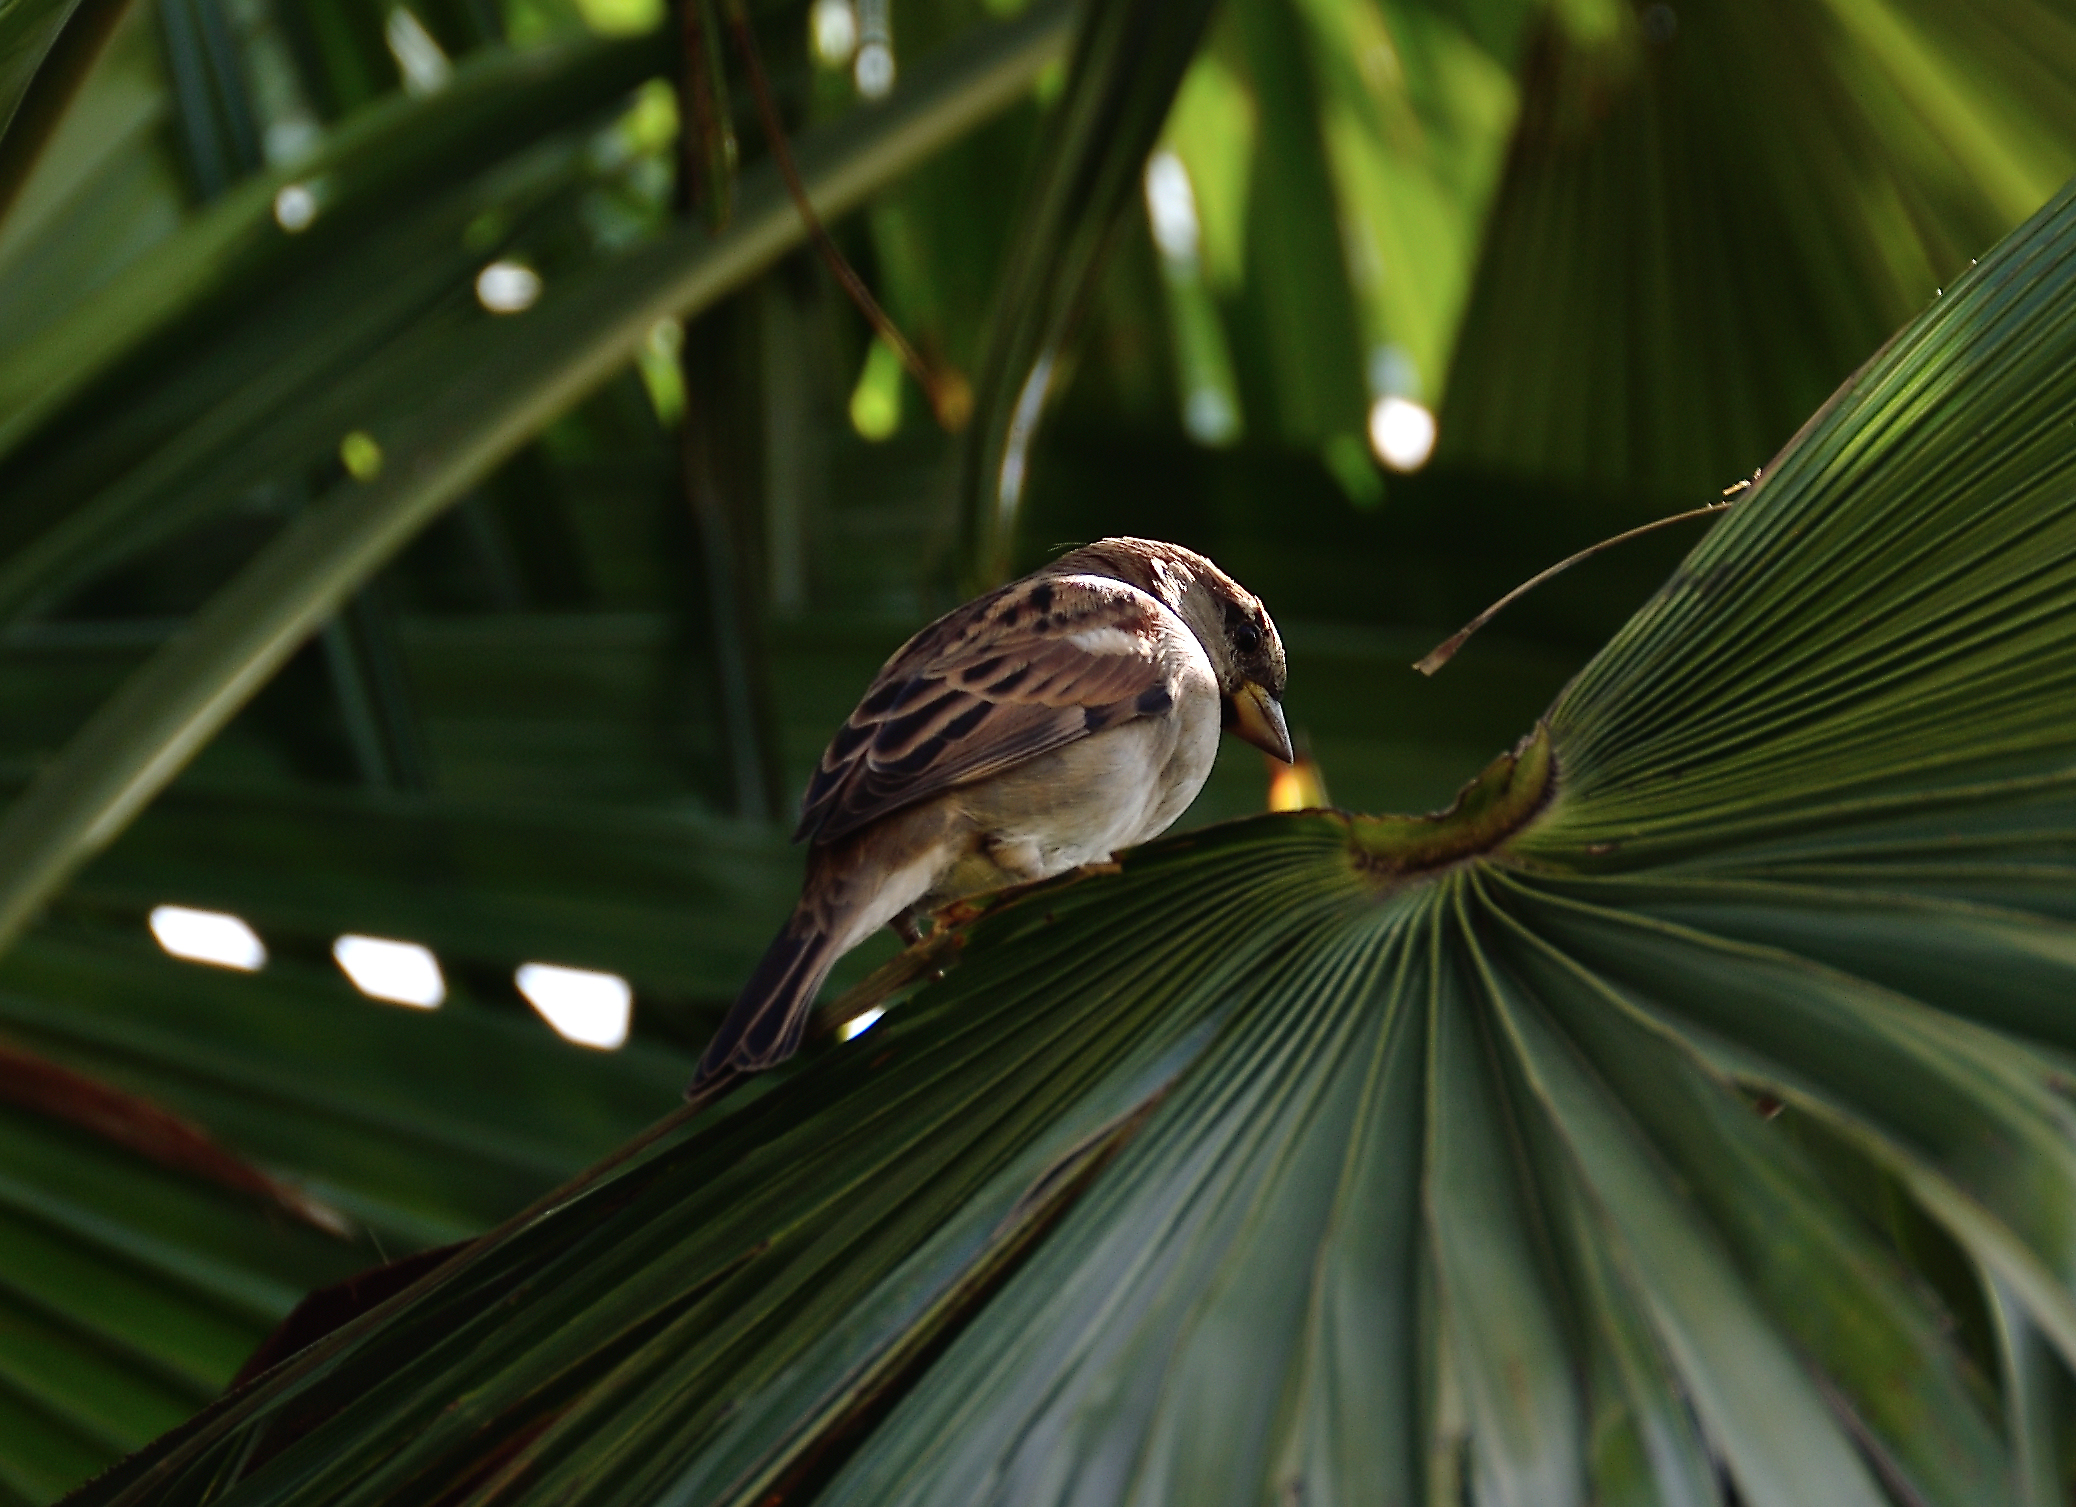 Sparrow on the palm trees...